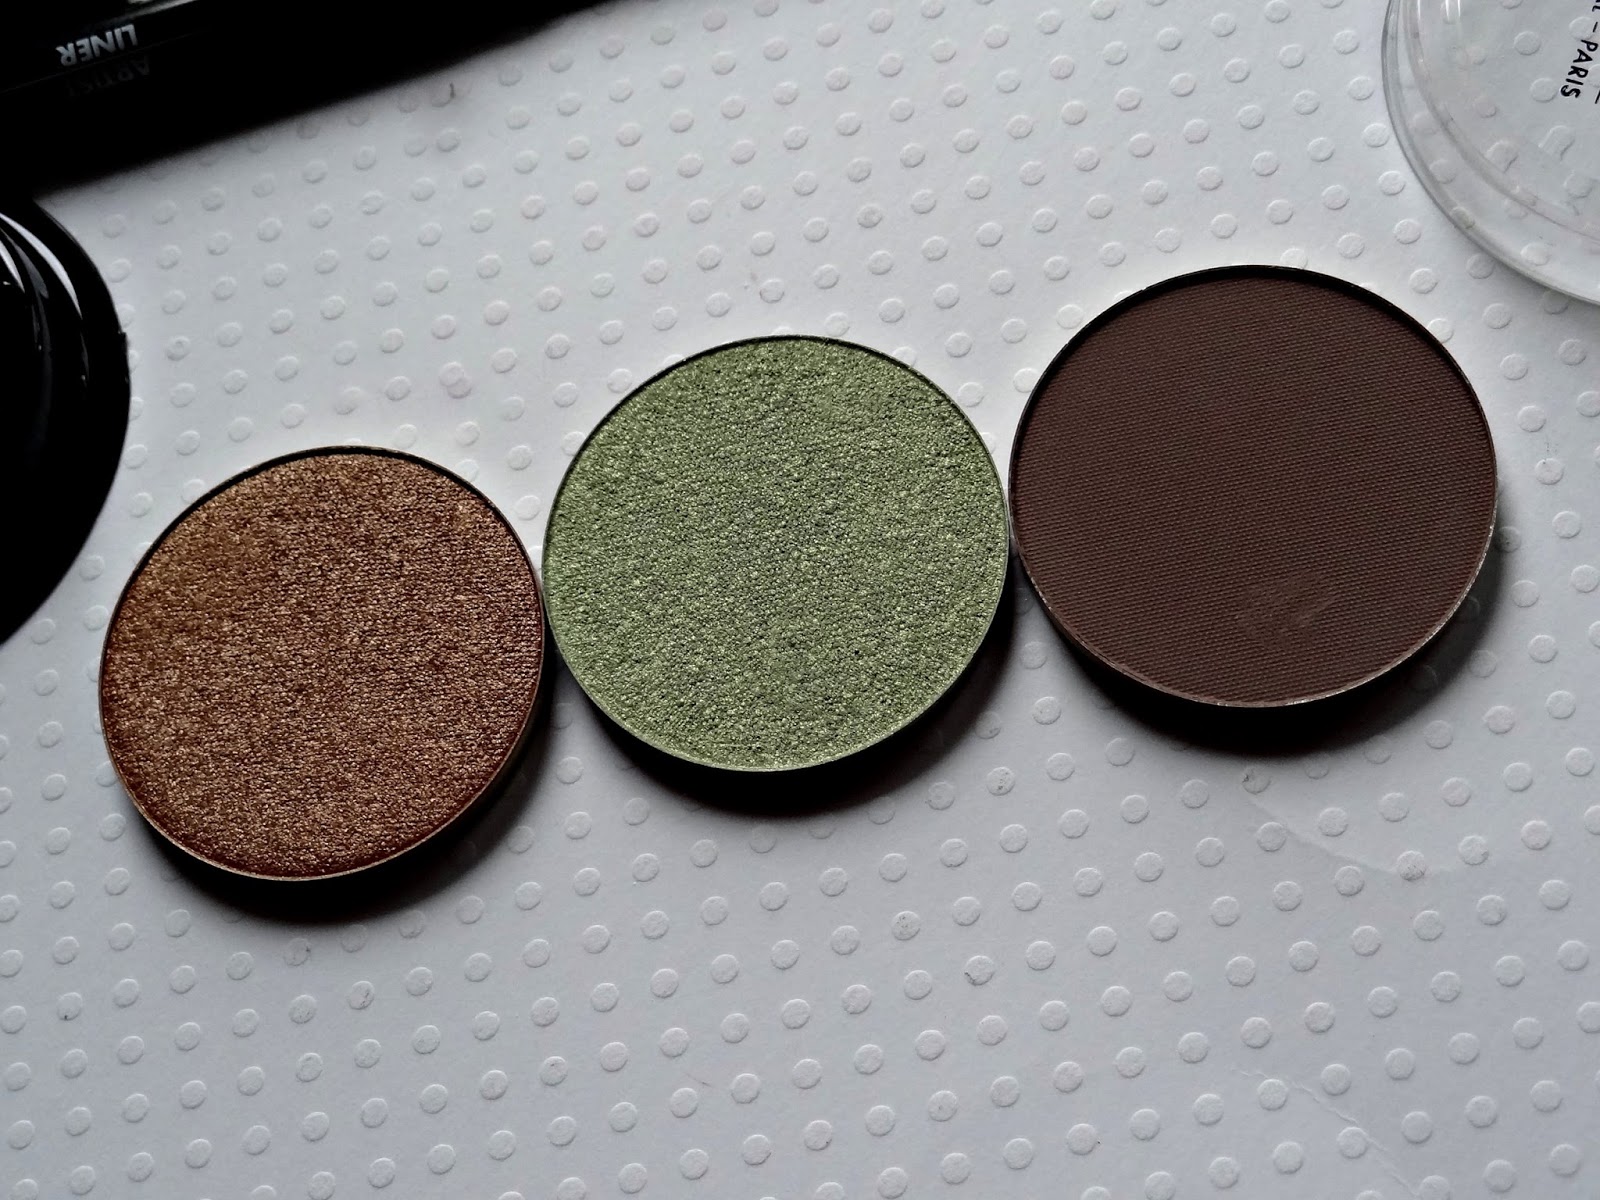 make up for ever artist eyeshadows in i662, m558, i330 Review, Photos & Swatches